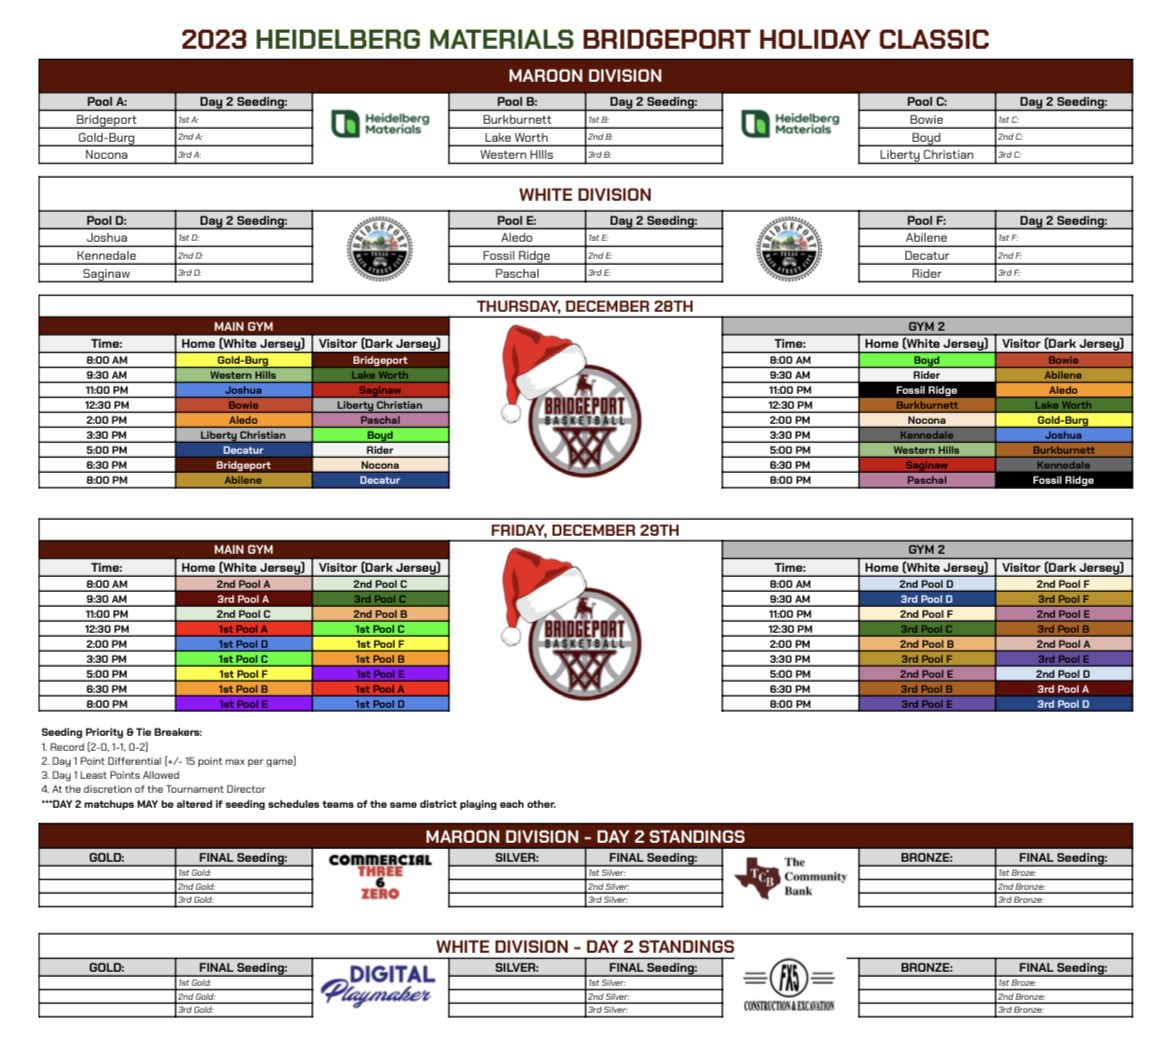 We are excited to host our Annual Holiday Classic. We have a great field of teams playing in 2 divisions. Come out and watch some Holiday Hoops! @BridgeportISD @bridgeport_BHS @BridgeportMS @Bulls_Sissies @hoopinsider @dfwvarsity @Gosset41 @WCMSports docs.google.com/spreadsheets/d…